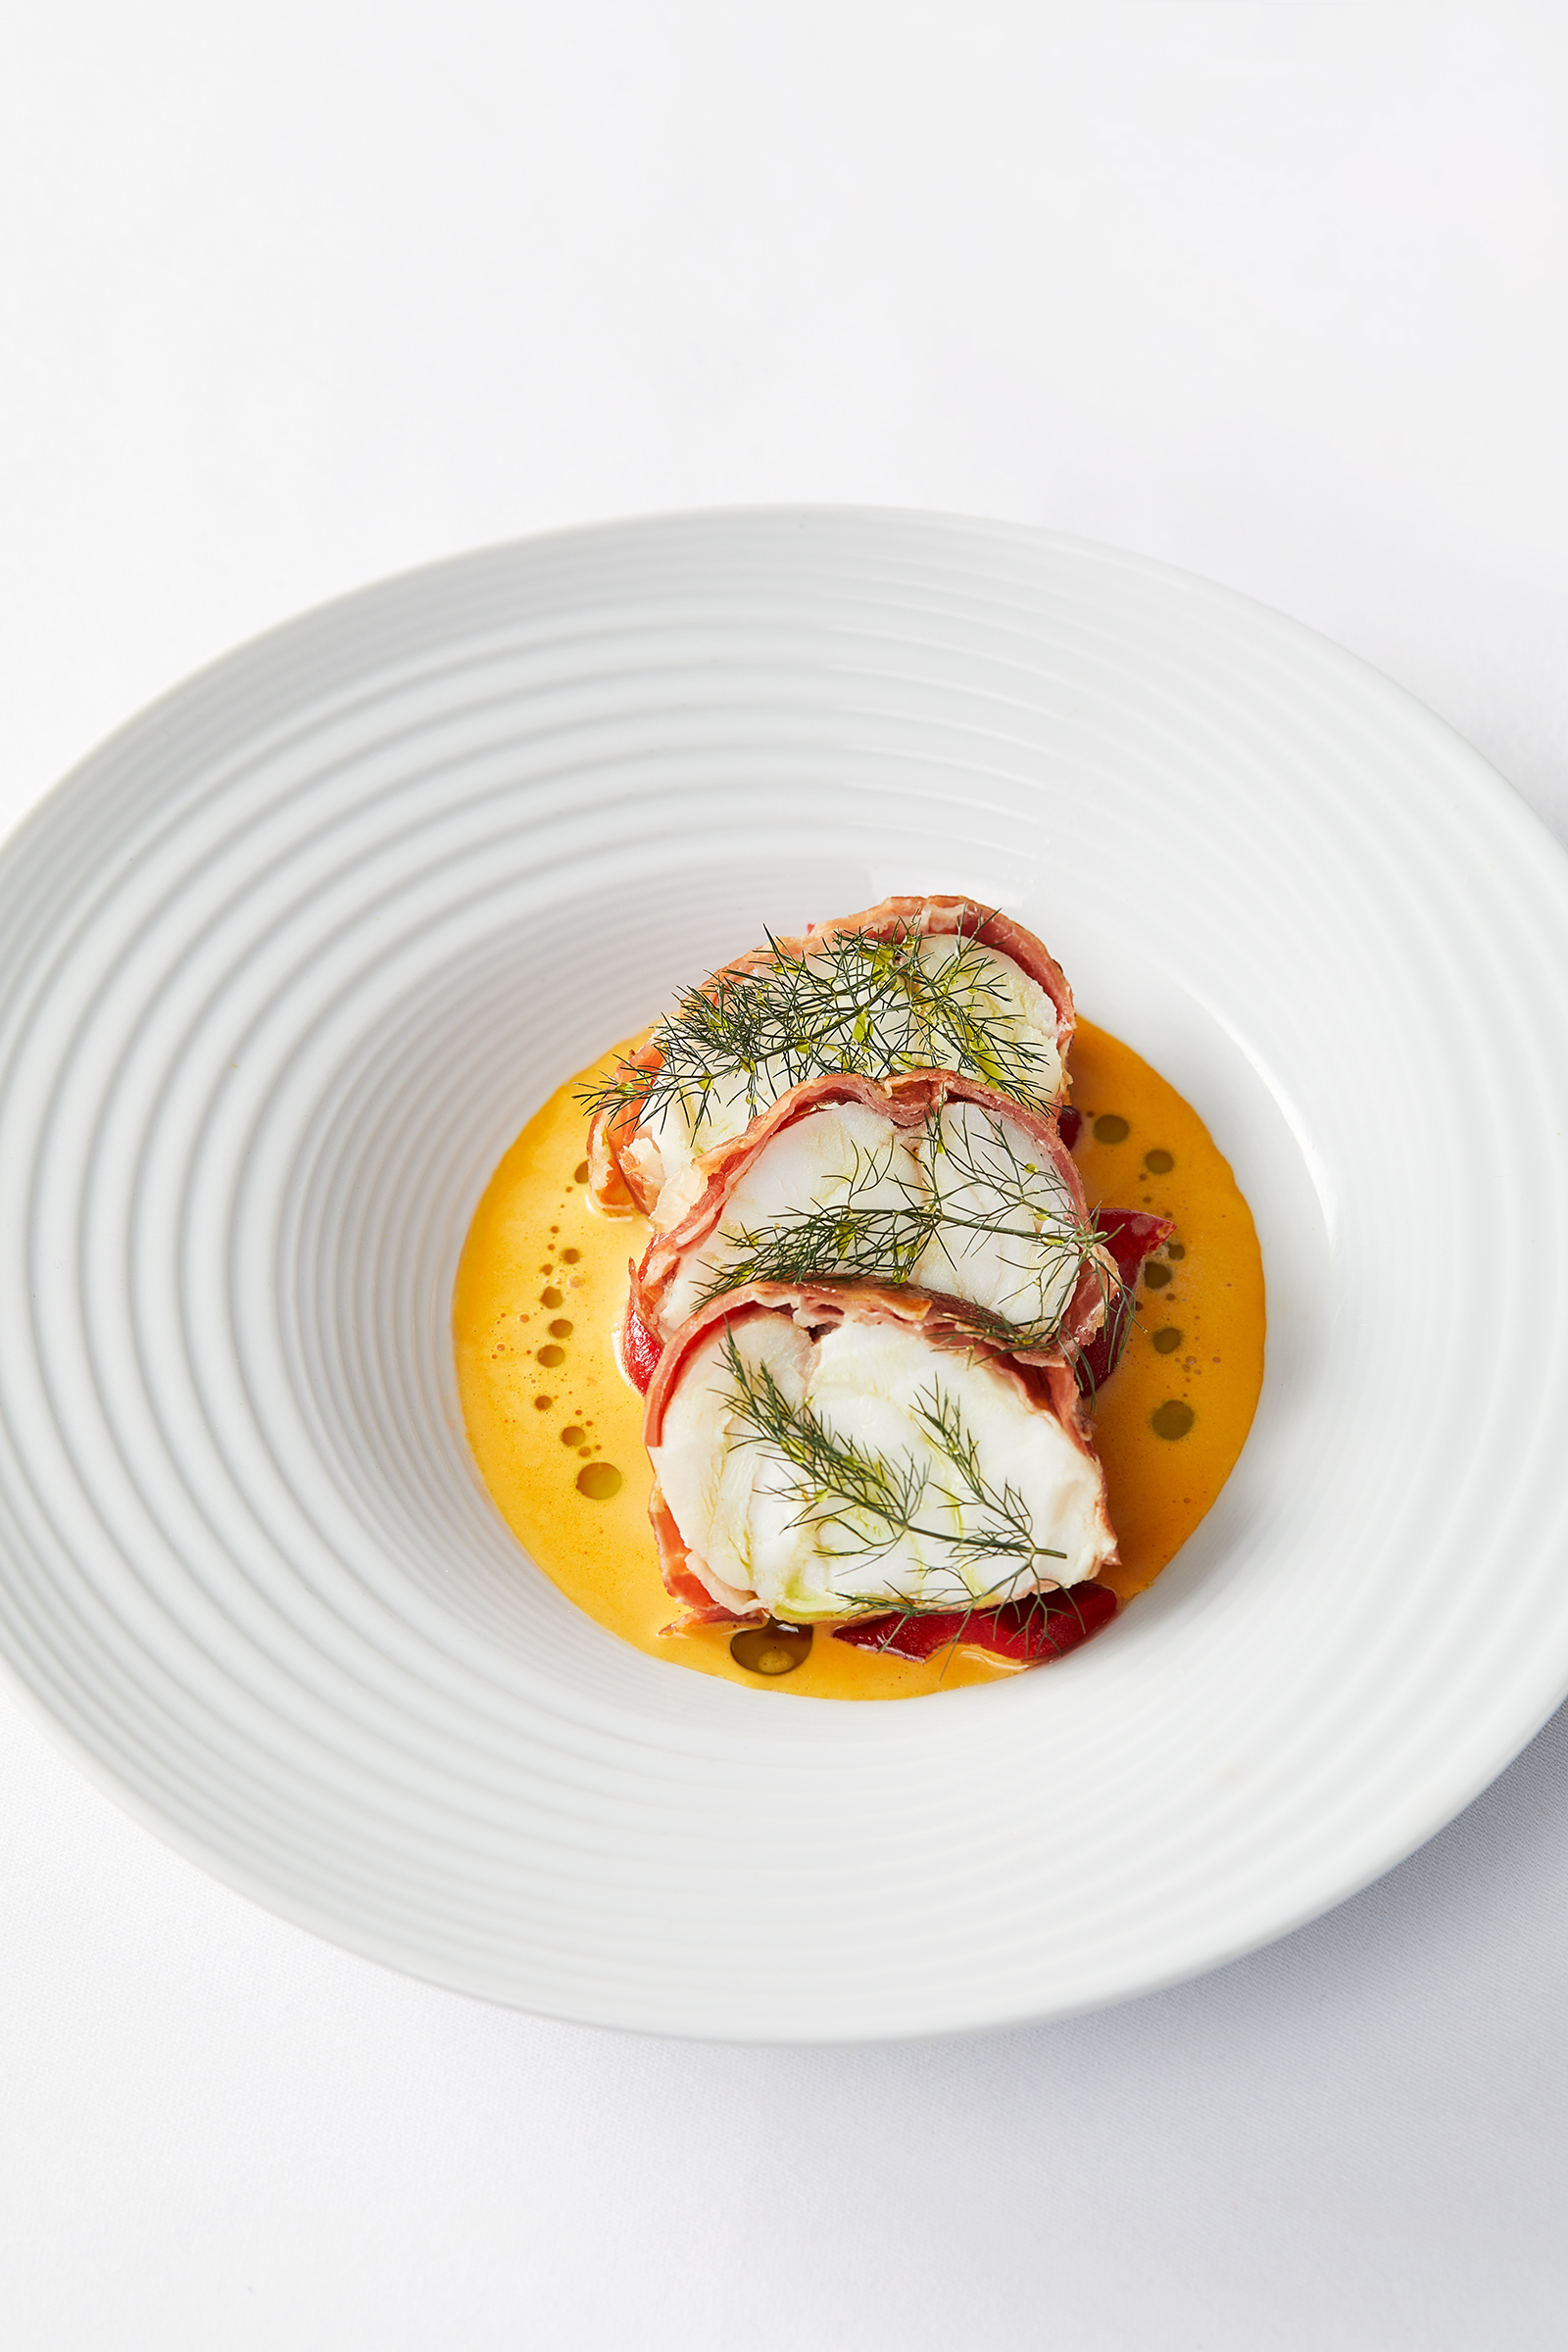 Pancetta wrapped Monkfish & Shellfish Sauce at The Compleat Angler, Alastair Ferrier photographer